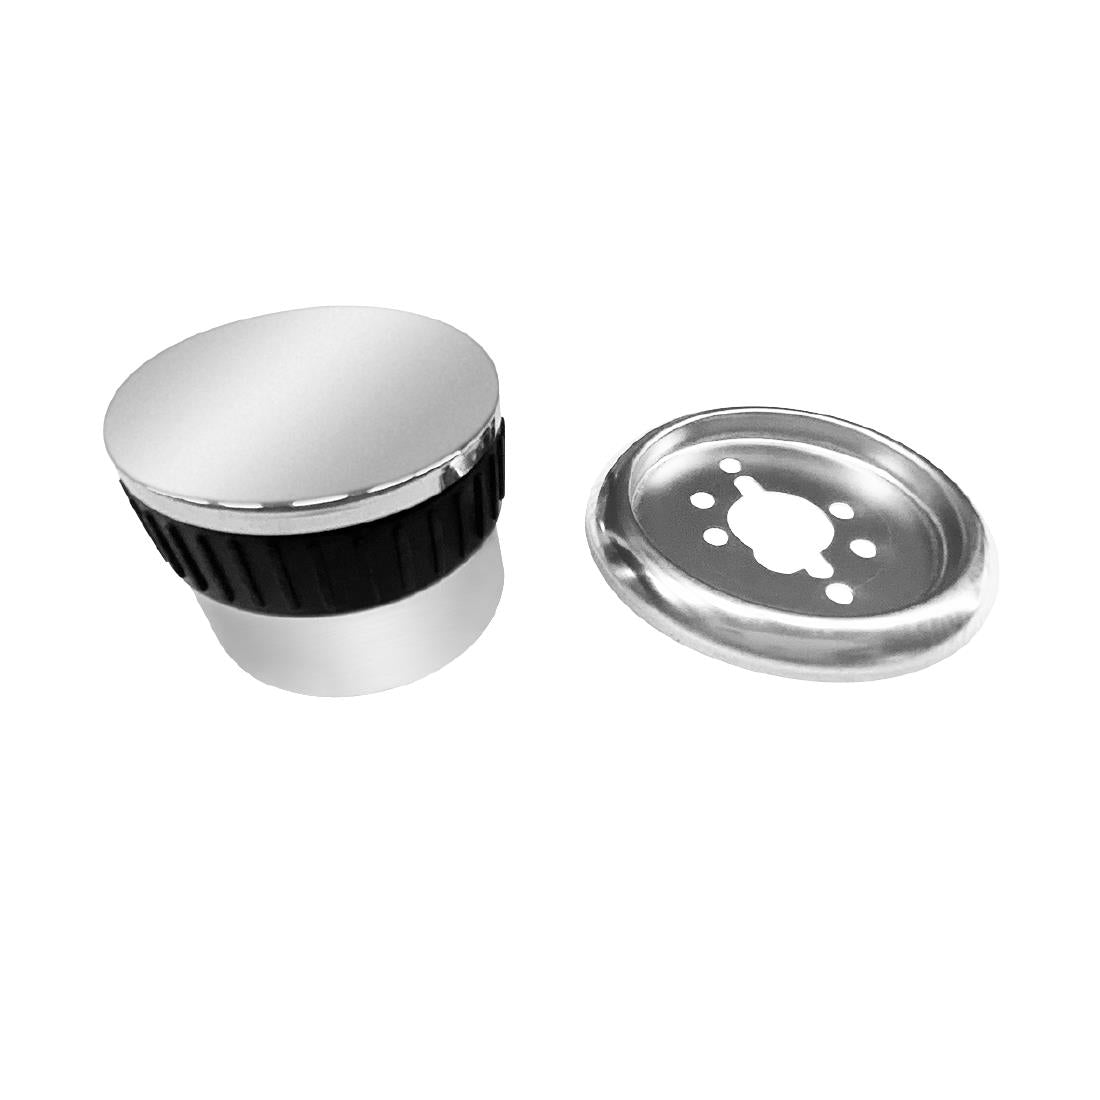 (Availability (28/01/24) AK151 Buffalo Complete Knob Set JD Catering Equipment Solutions Ltd